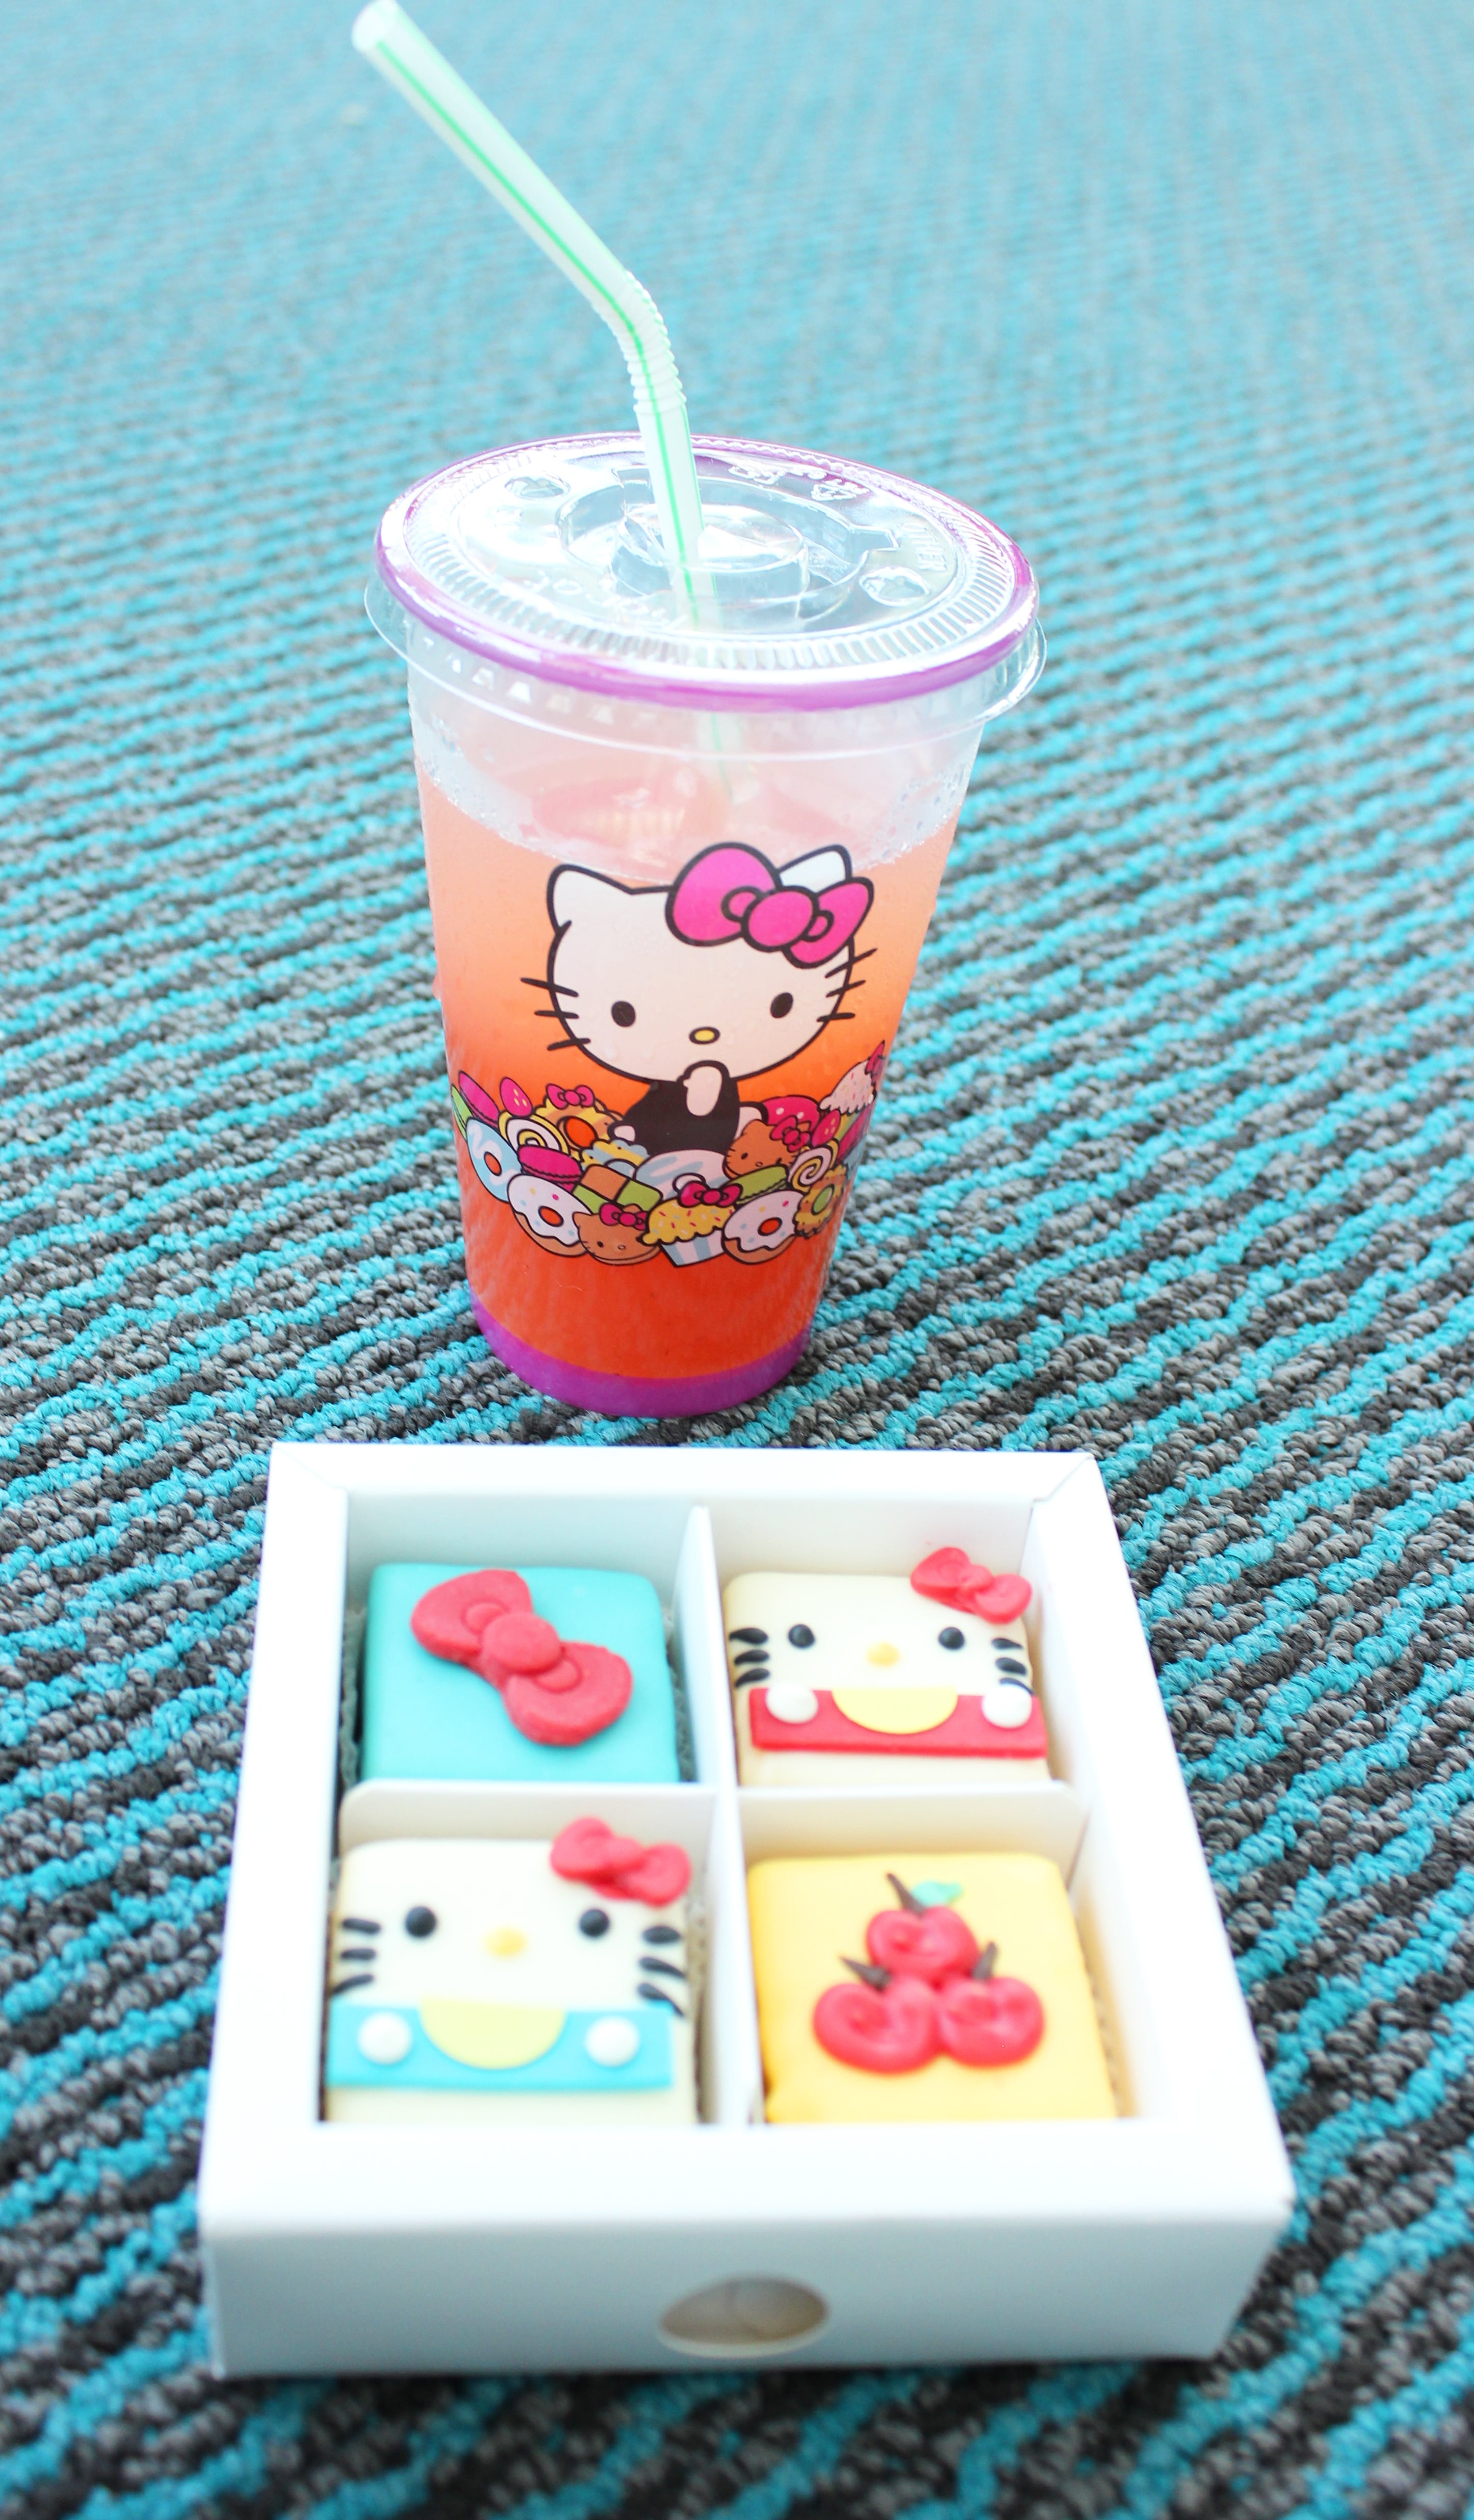 Hello Kitty Café Truck: Product Review – Turning the Pages